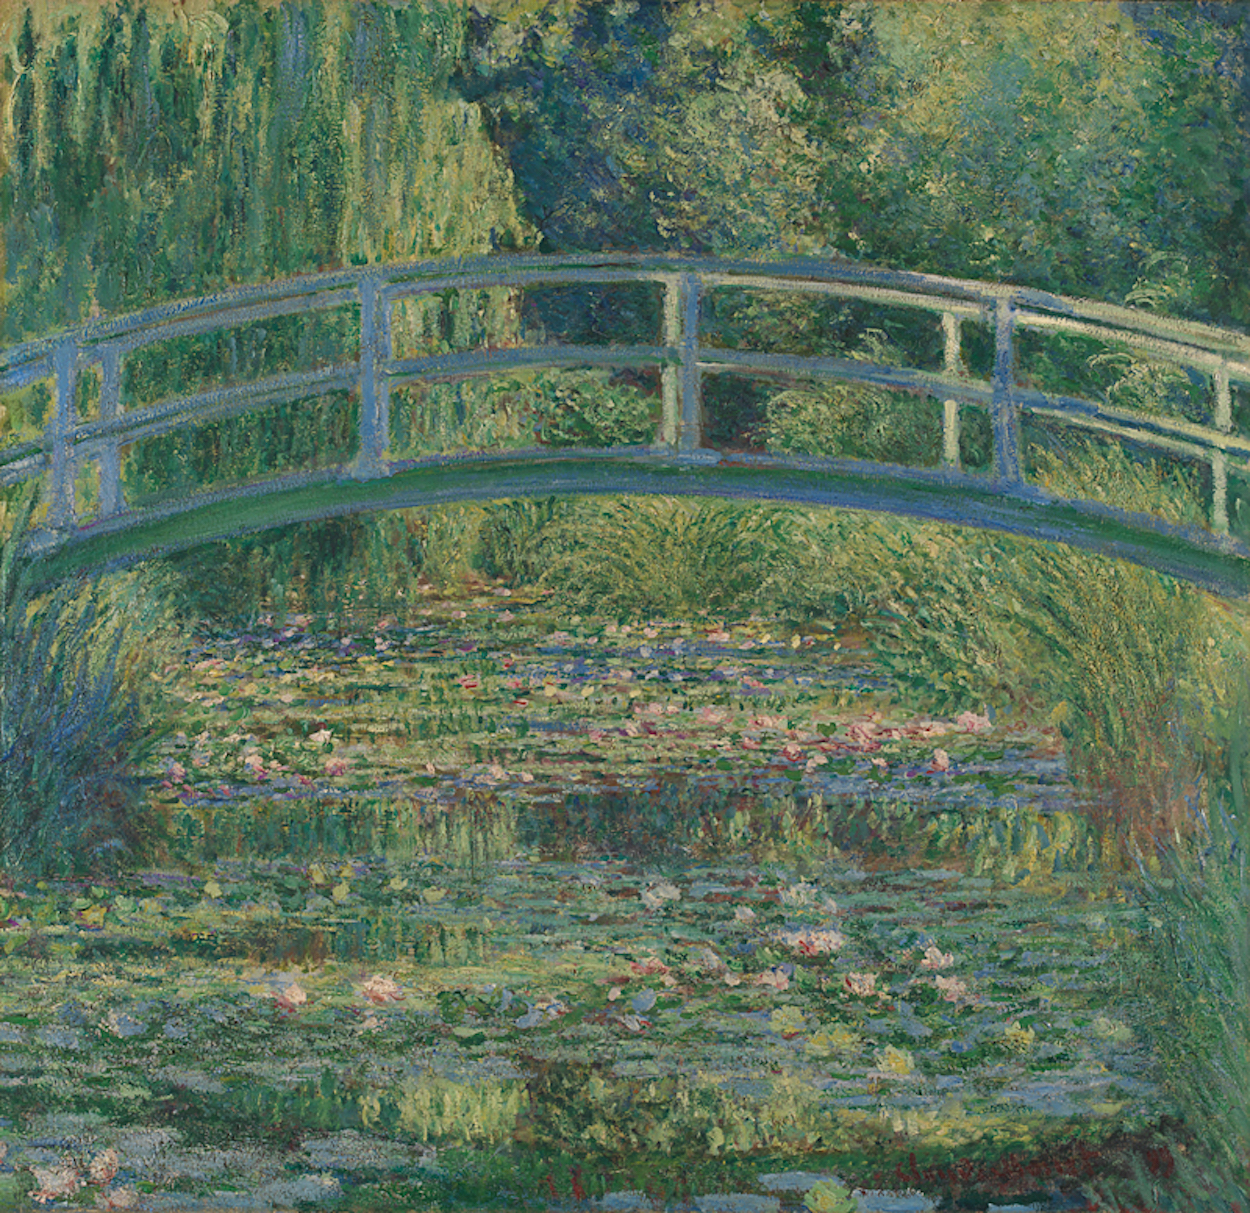 The Water-Lily Pond by Claude Monet - 1899 - 88.3 x 93.1 cm National Gallery